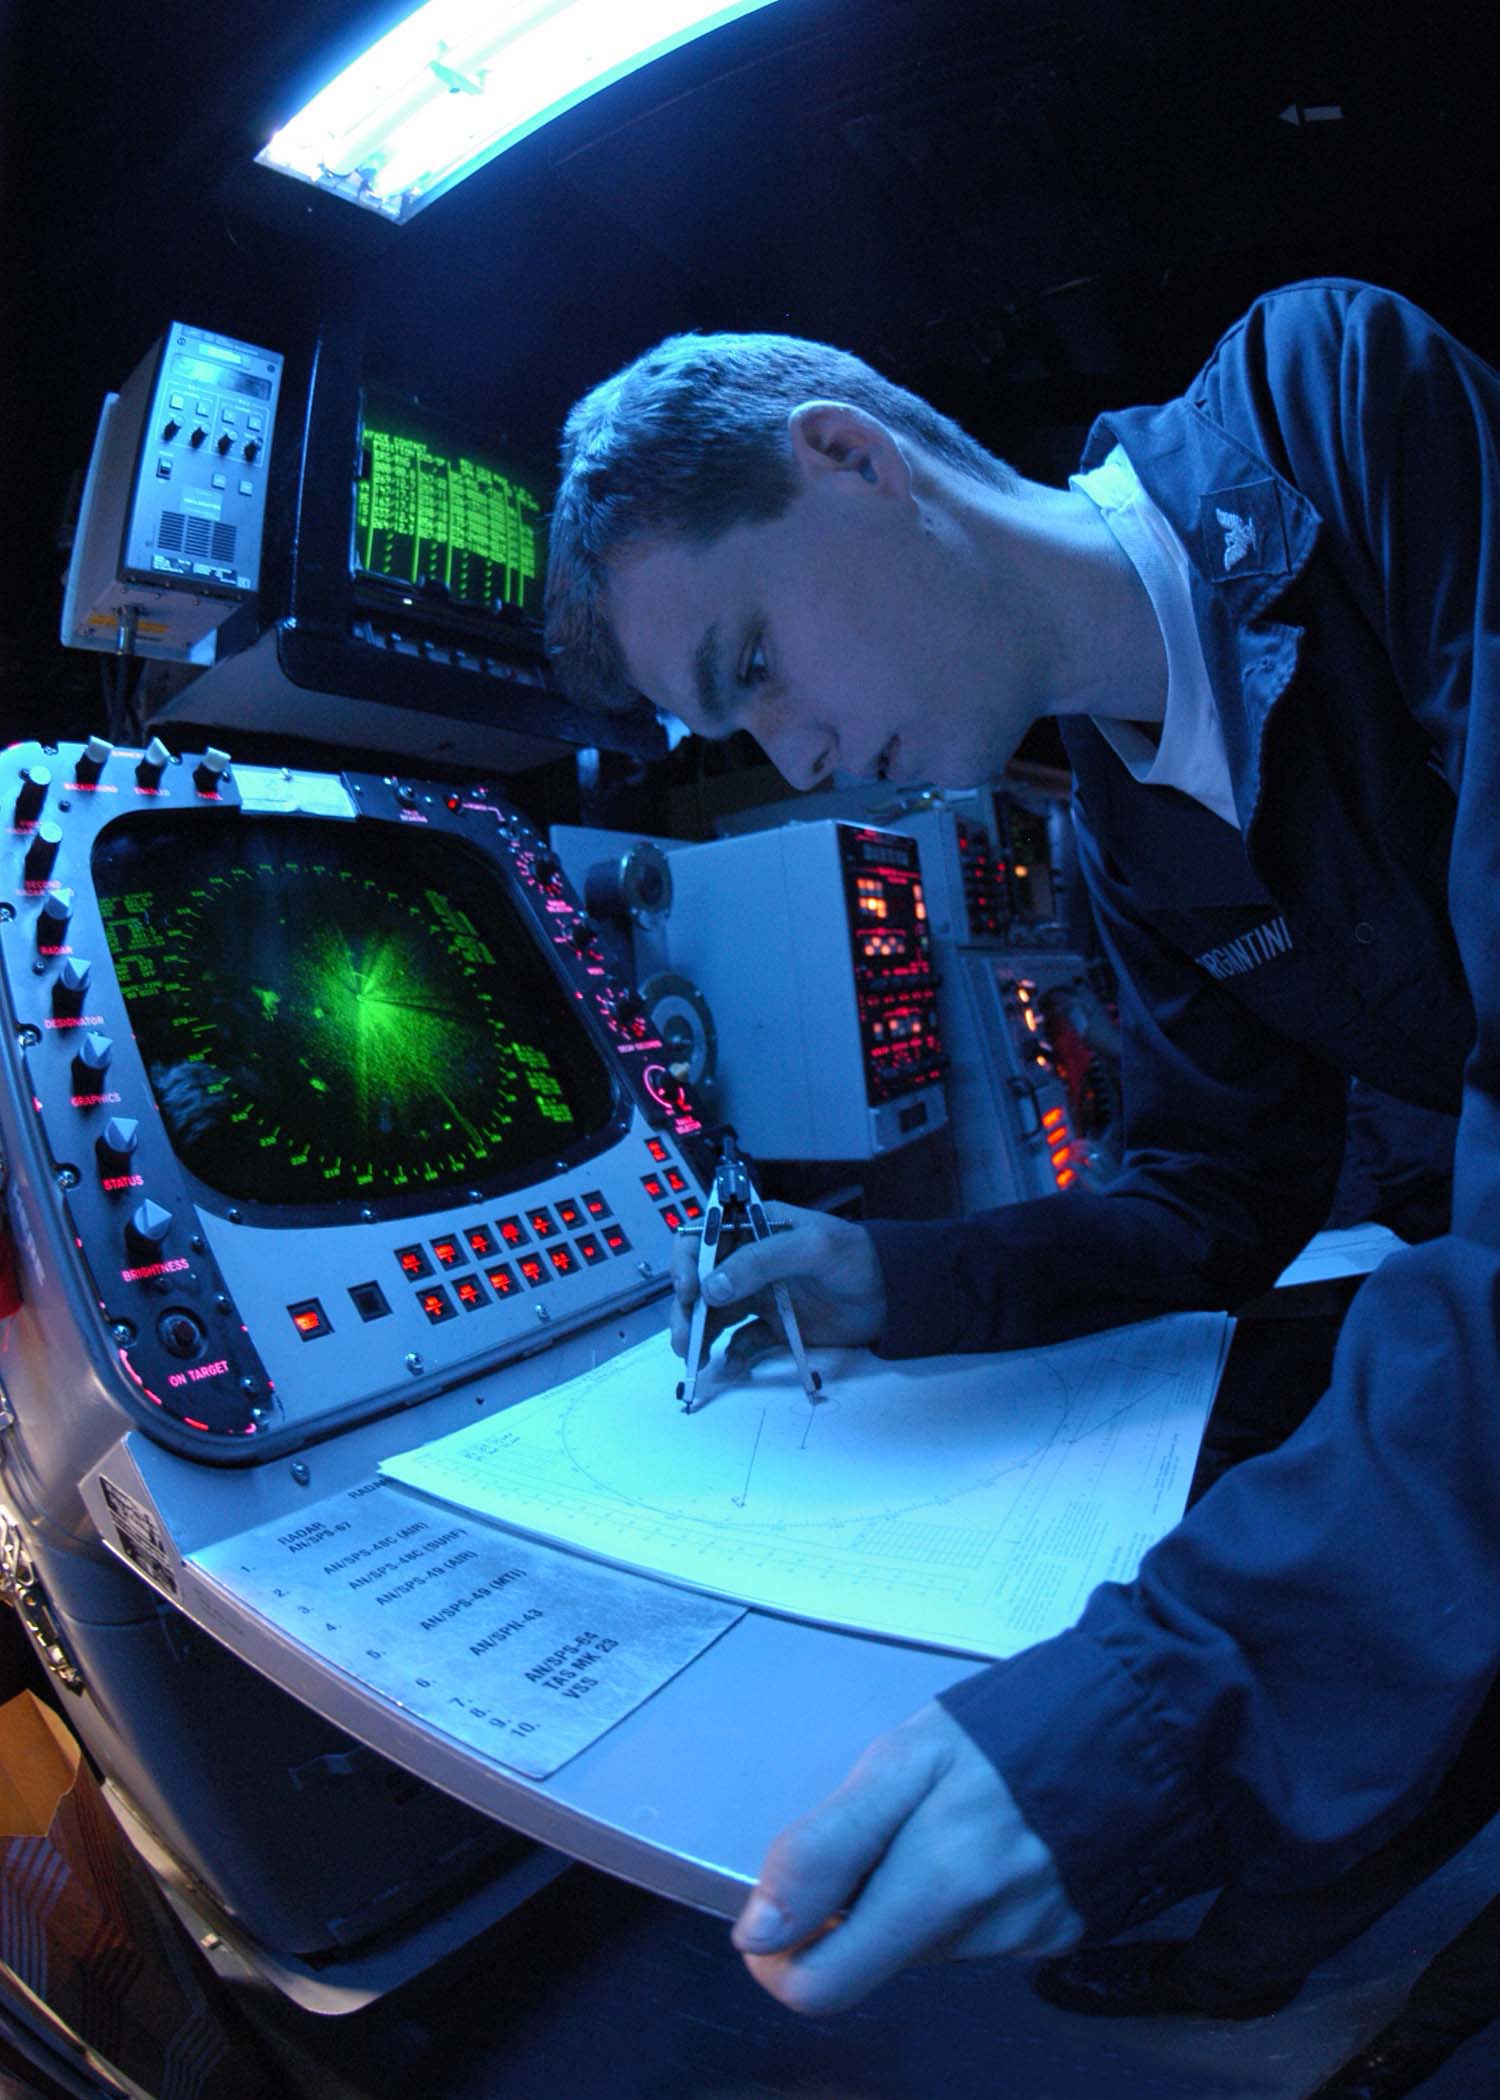 US Navy 041026-N-5362F-016 Operations Specialist 3rd class Jon Morgantini of Santa Barbra, Calif., uses the SPA-25 surface radar aboard USS Abraham Lincoln (CVN 72) to plot surface contacts